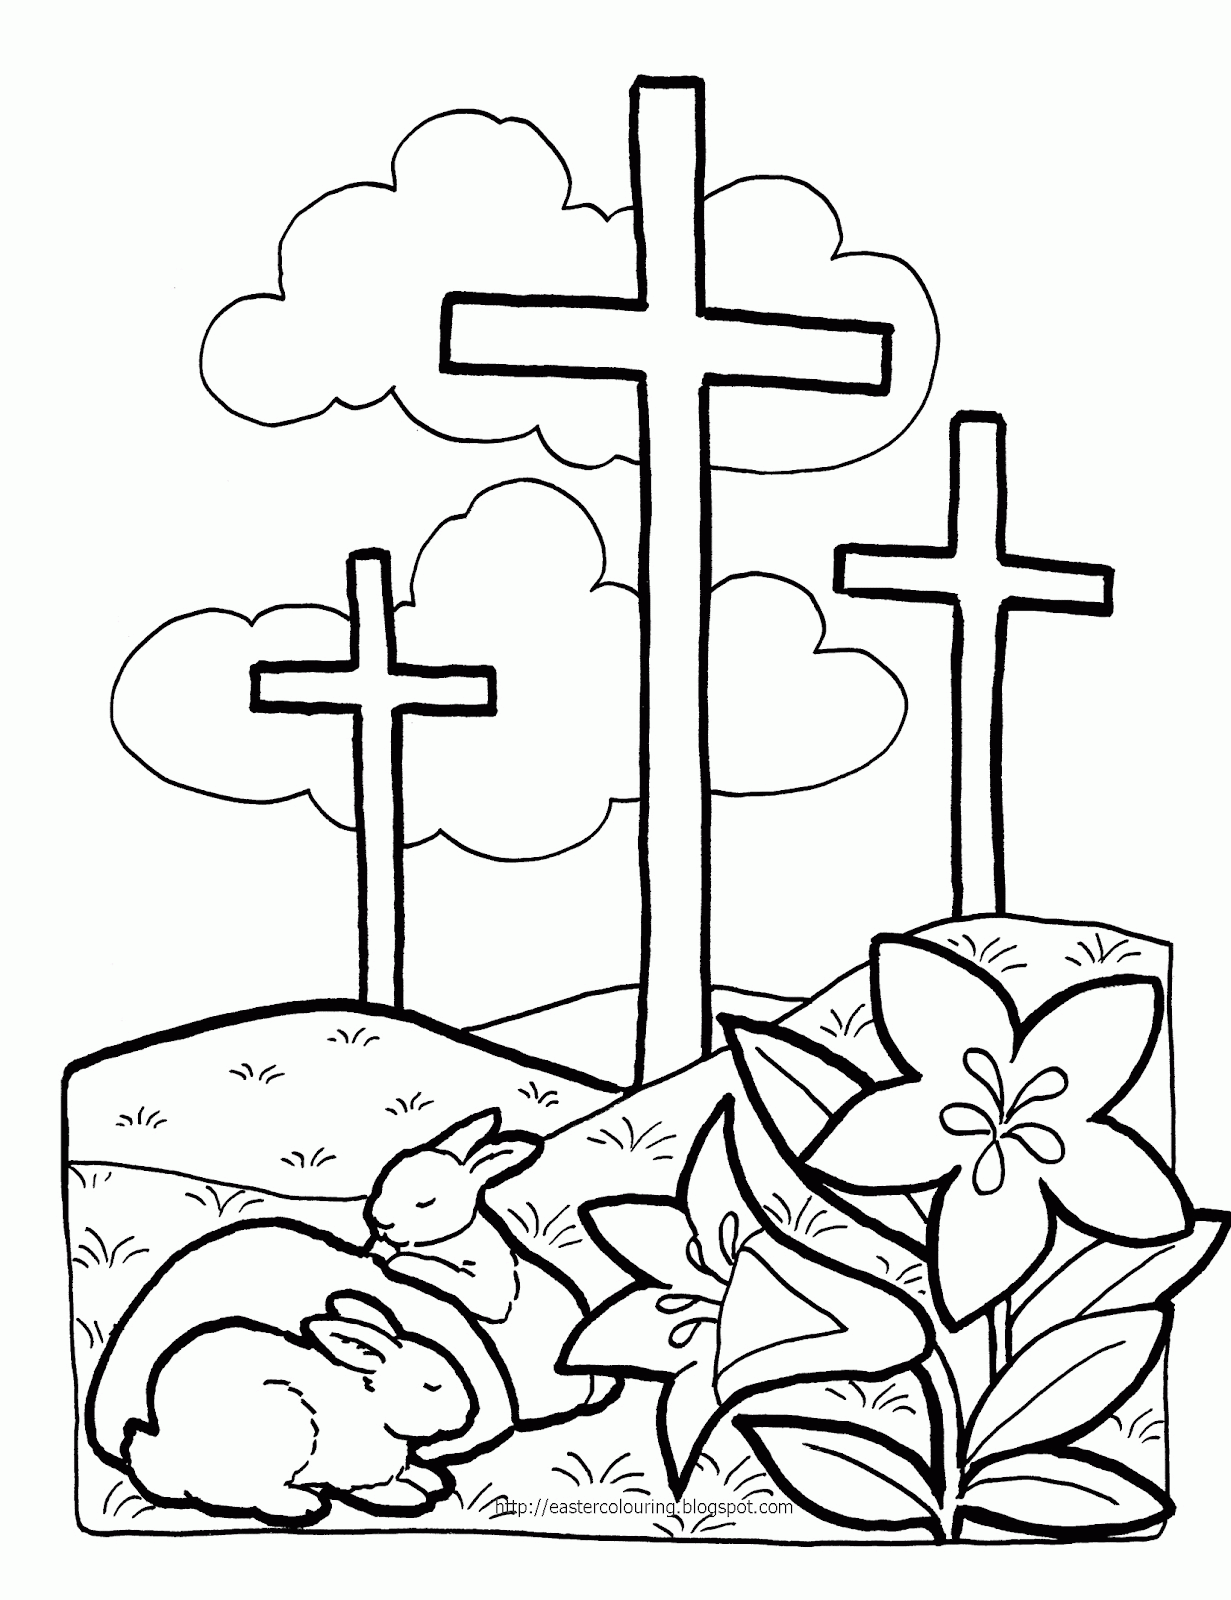 EASTER COLOURING: RELIGIOUS EASTER COLORING PAGES